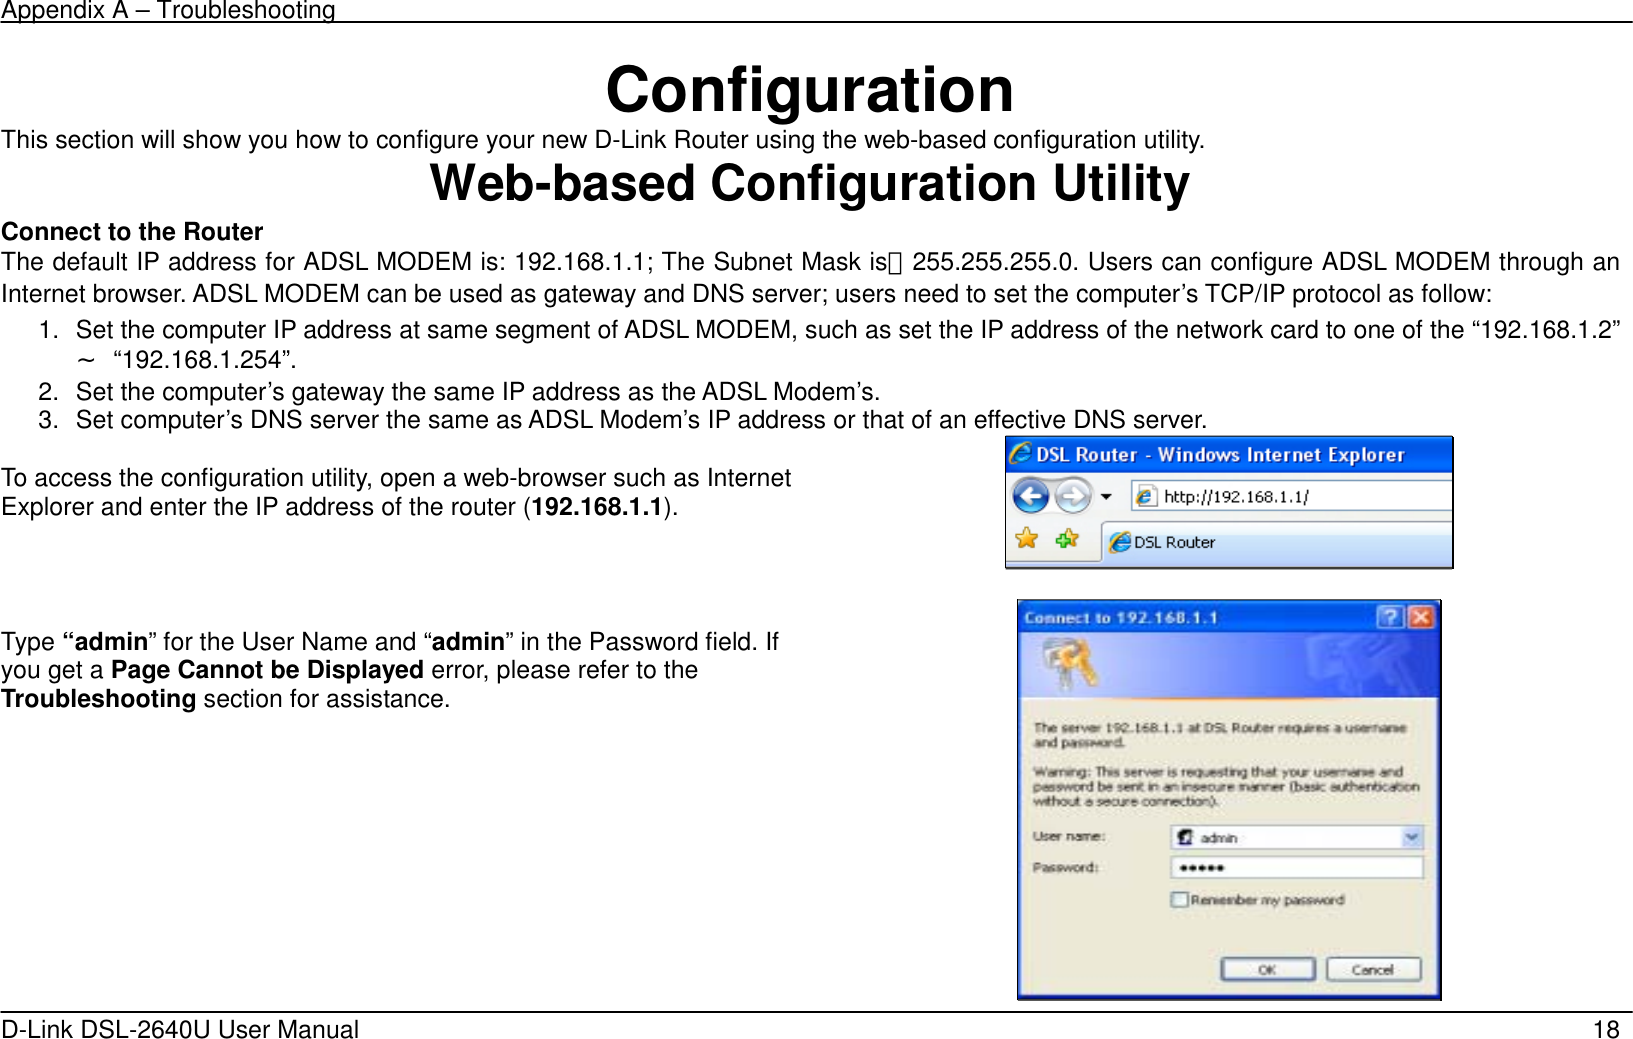 Appendix A – Troubleshooting   D-Link DSL-2640U User Manual    18 Configuration This section will show you how to configure your new D-Link Router using the web-based configuration utility. Web-based Configuration Utility Connect to the Router   The default IP address for ADSL MODEM is: 192.168.1.1; The Subnet Mask is：255.255.255.0. Users can configure ADSL MODEM through an Internet browser. ADSL MODEM can be used as gateway and DNS server; users need to set the computer’s TCP/IP protocol as follow: 1.  Set the computer IP address at same segment of ADSL MODEM, such as set the IP address of the network card to one of the “192.168.1.2”∼ “192.168.1.254”. 2.  Set the computer’s gateway the same IP address as the ADSL Modem’s. 3.  Set computer’s DNS server the same as ADSL Modem’s IP address or that of an effective DNS server.  To access the configuration utility, open a web-browser such as Internet Explorer and enter the IP address of the router (192.168.1.1).      Type “admin” for the User Name and “admin” in the Password field. If you get a Page Cannot be Displayed error, please refer to the Troubleshooting section for assistance.  